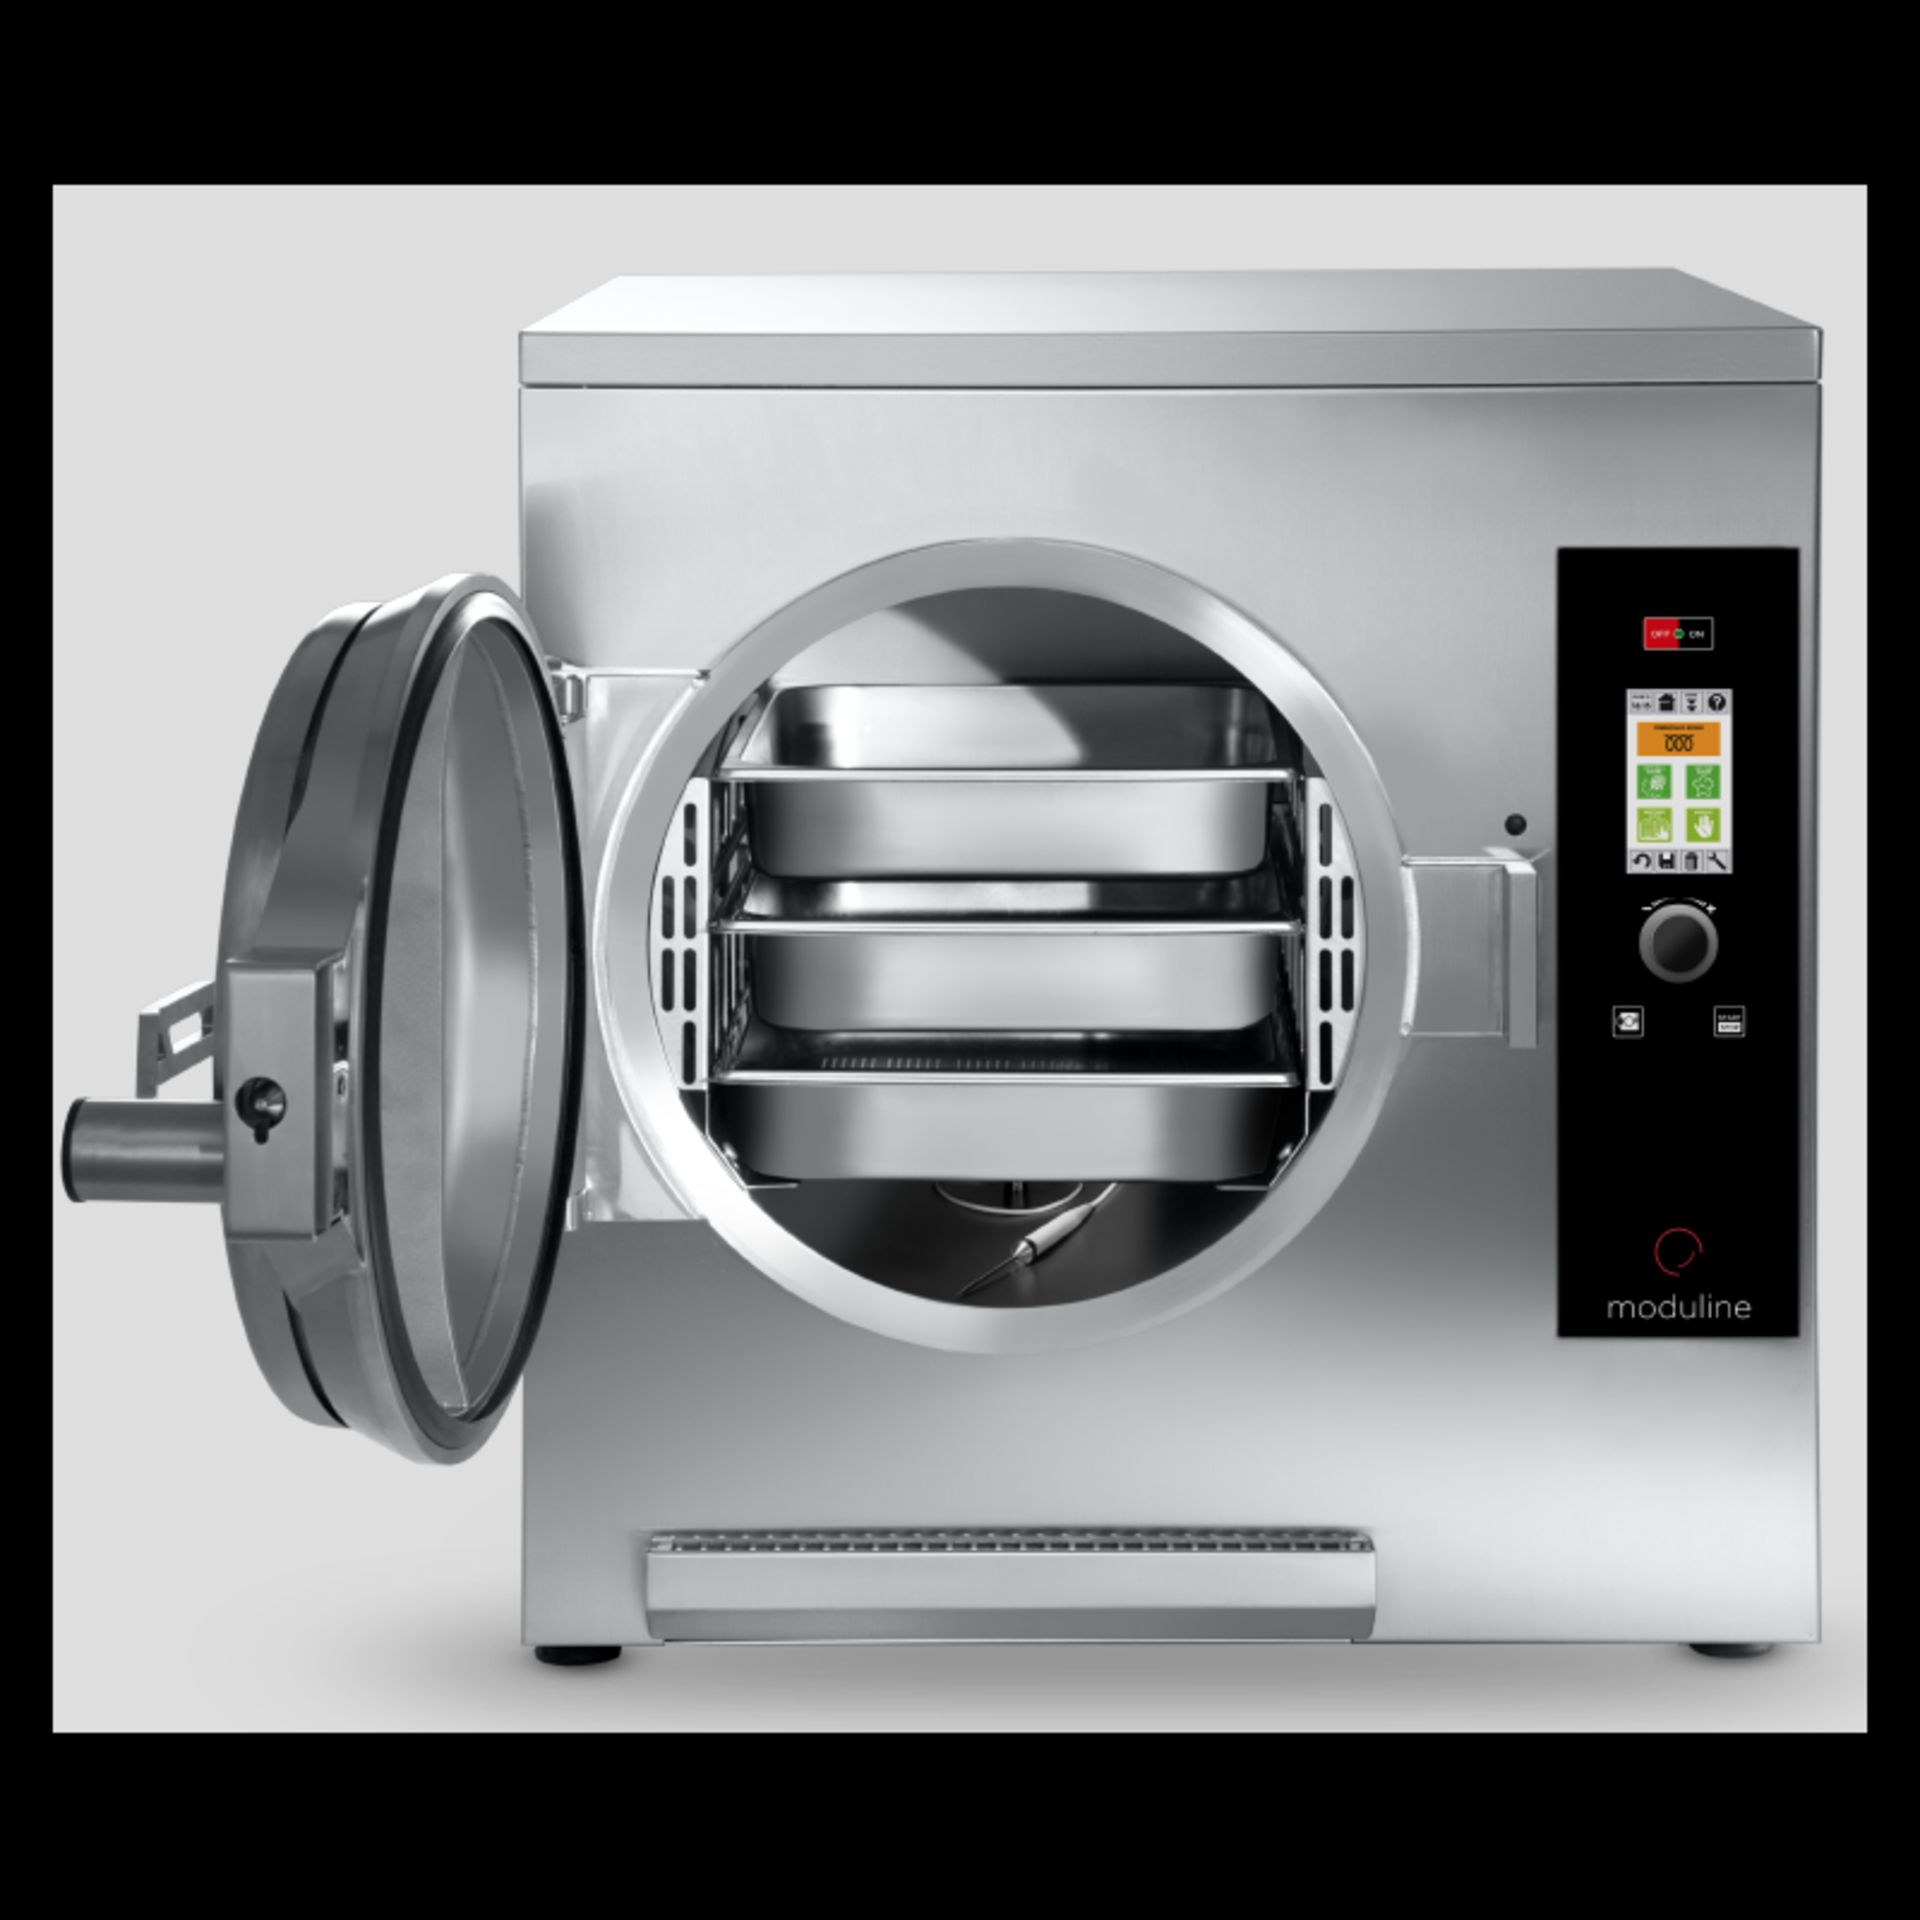 1 x Moduline Cook and Hold Convection Oven and Pressure Steamer Cooker - Features USB Connection, To - Image 6 of 16